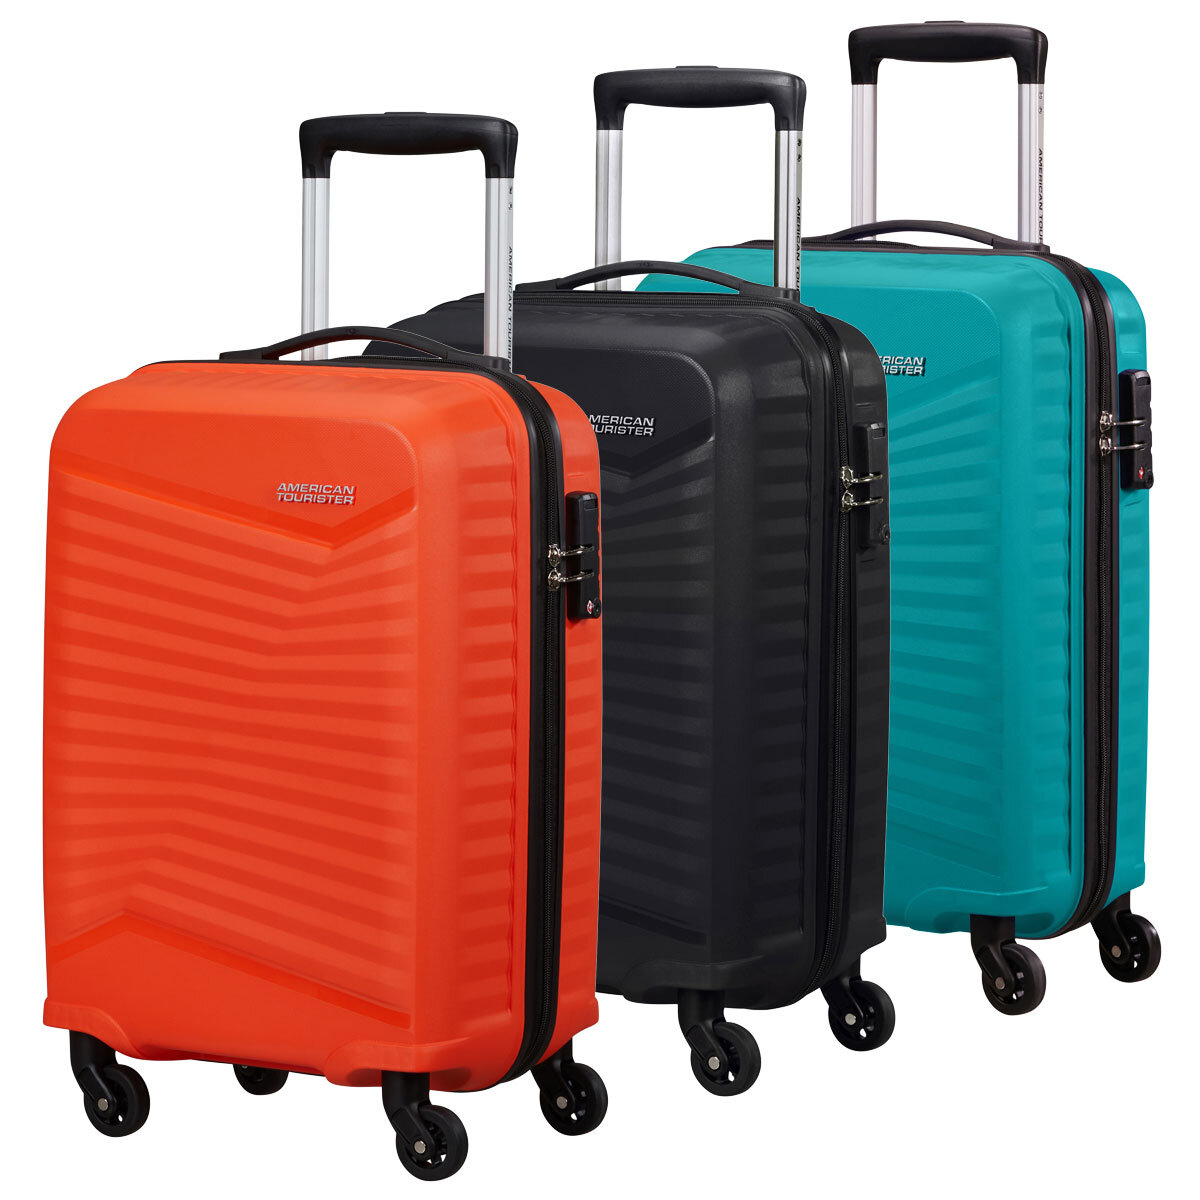 Buy Black Airconic Spinner Cabin (55 cm) Hard Luggage Online at